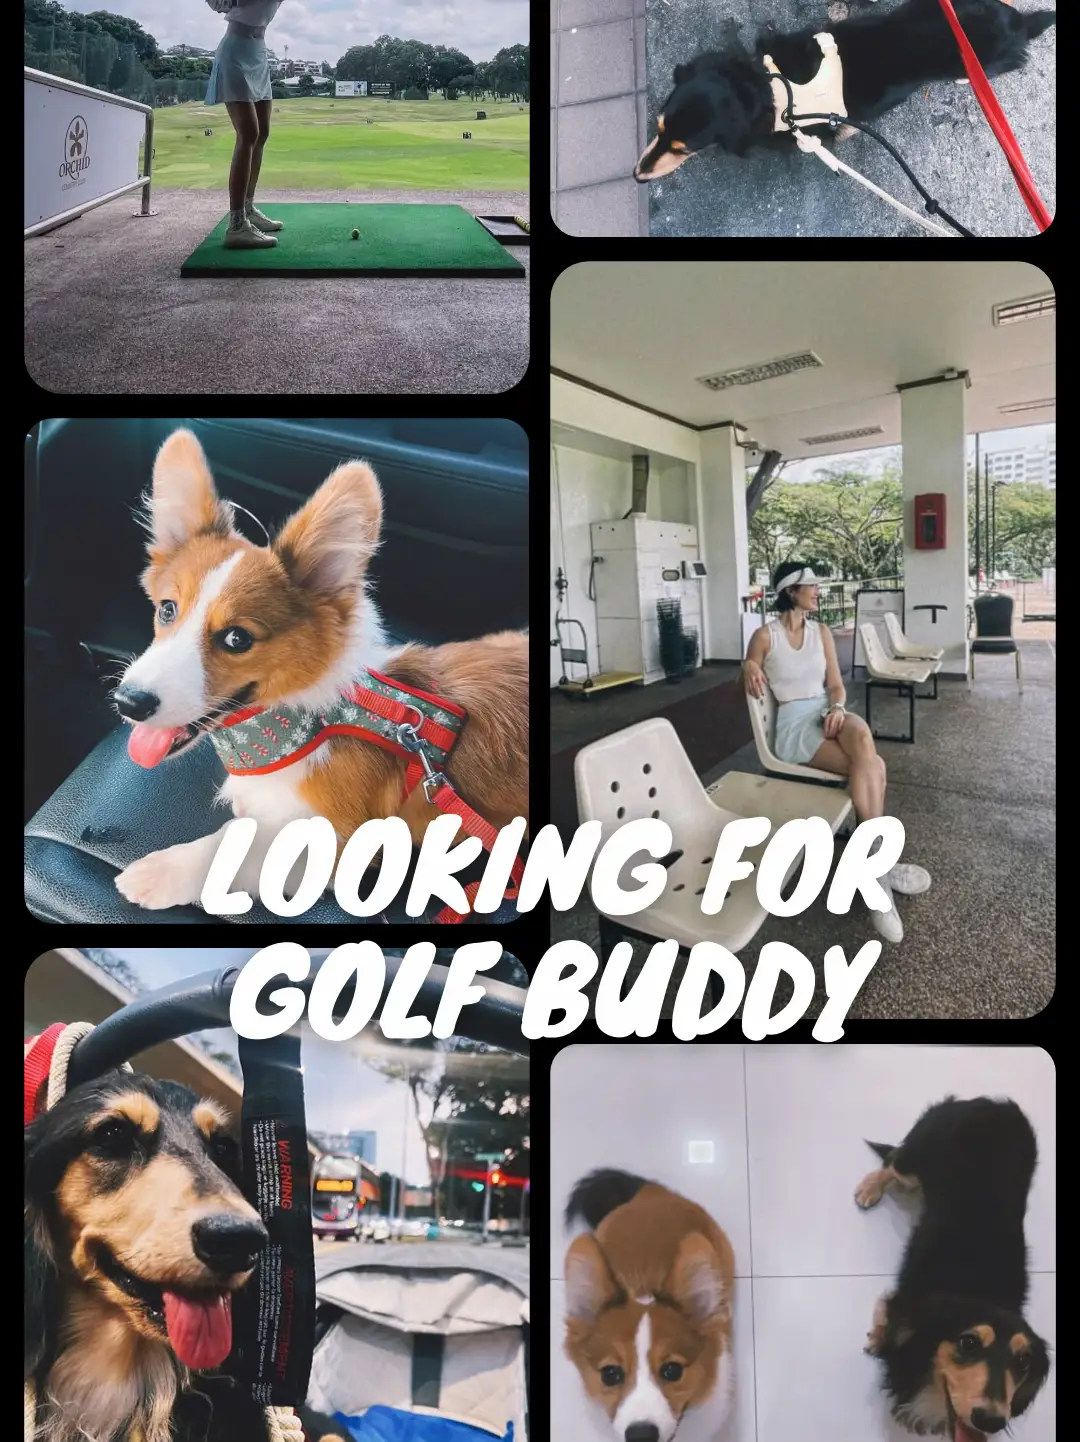 ✨Looking for Golf Buddy✨'s images(0)